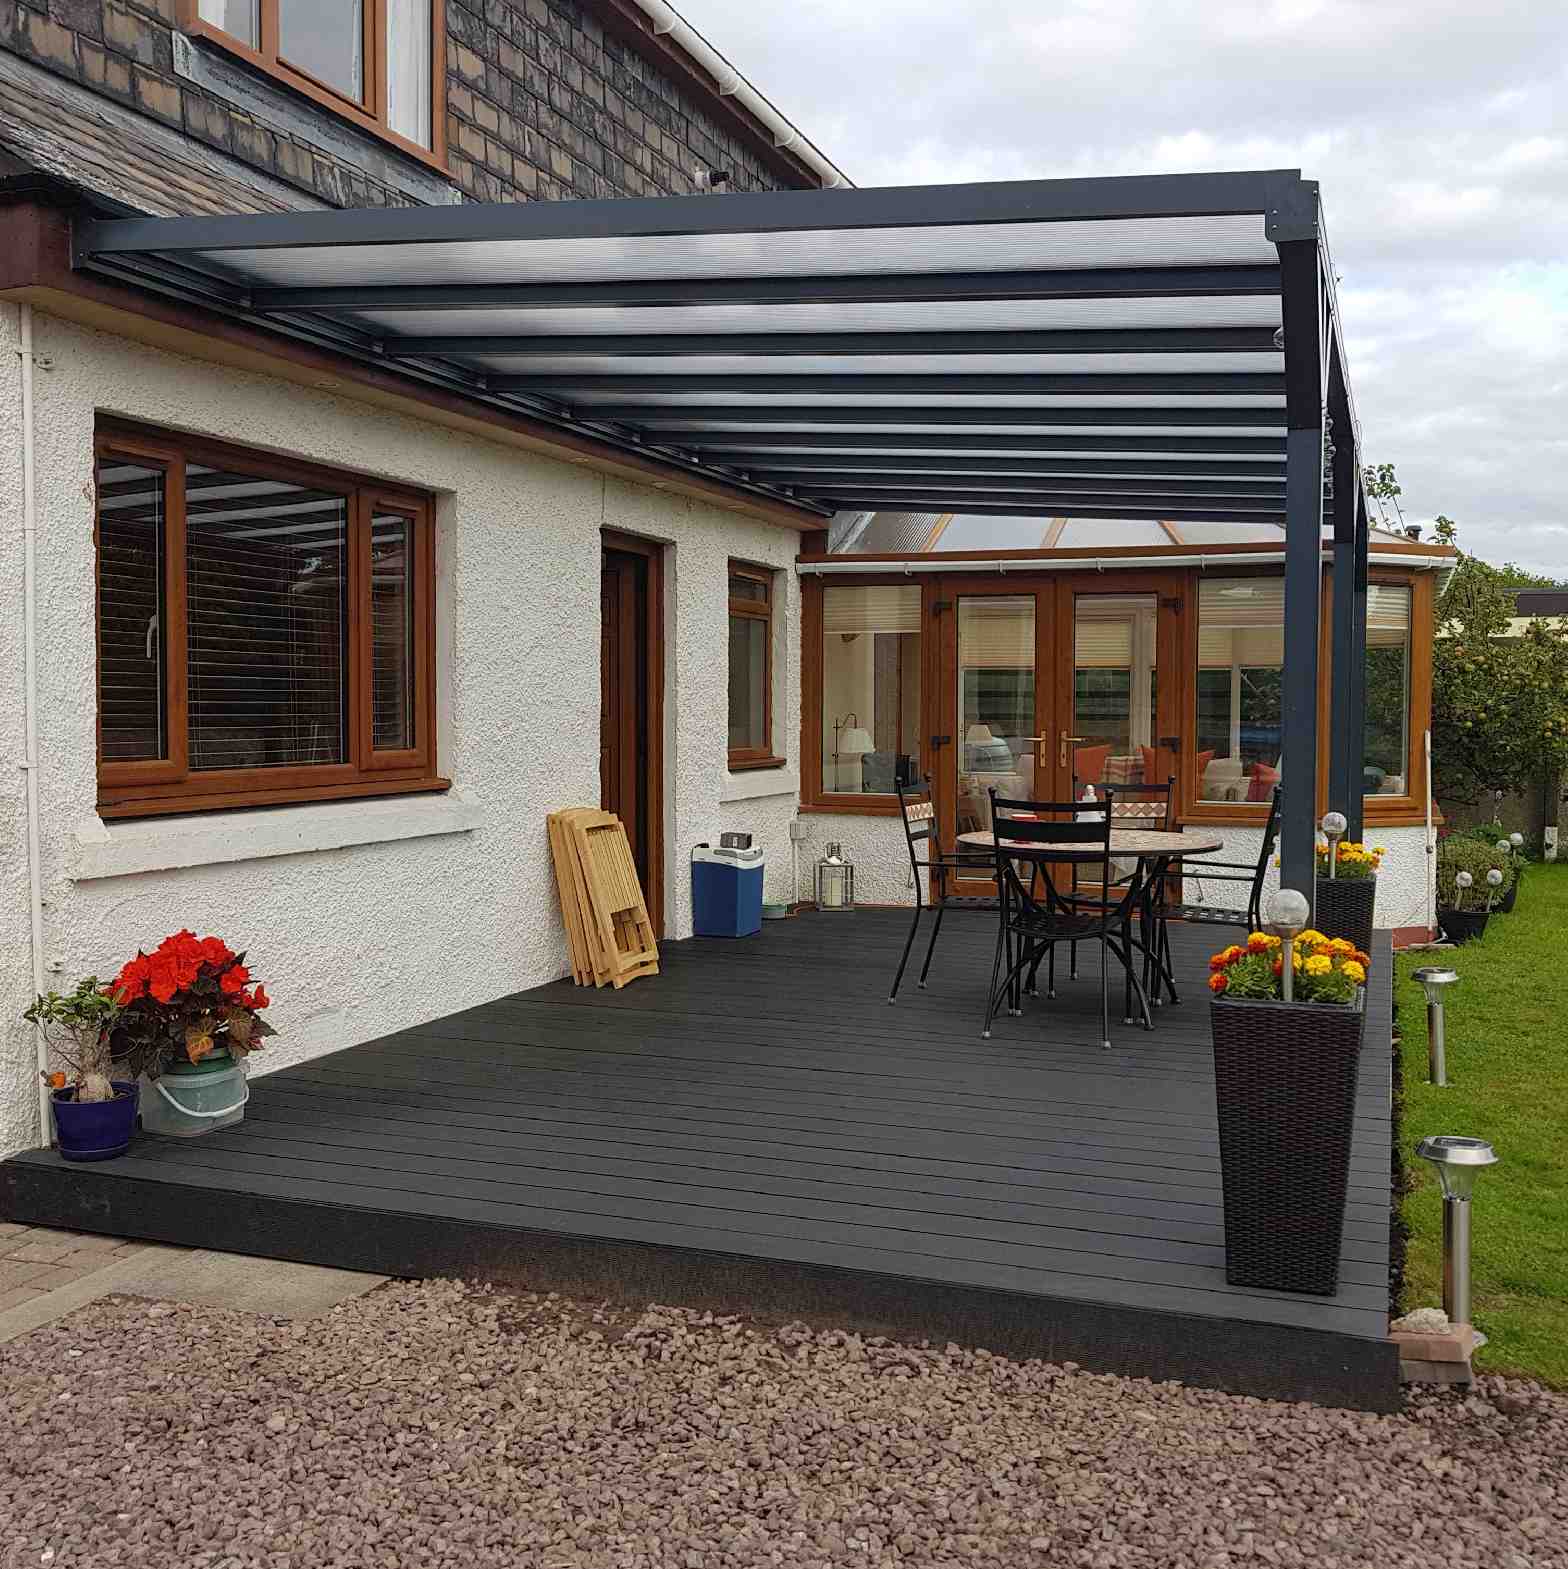 Buy Omega Verandah, Anthracite Grey, 6mm Glass Clear Plate Polycarbonate Glazing - 7.0m (W) x 3.0m (P), (4) Supporting Posts online today